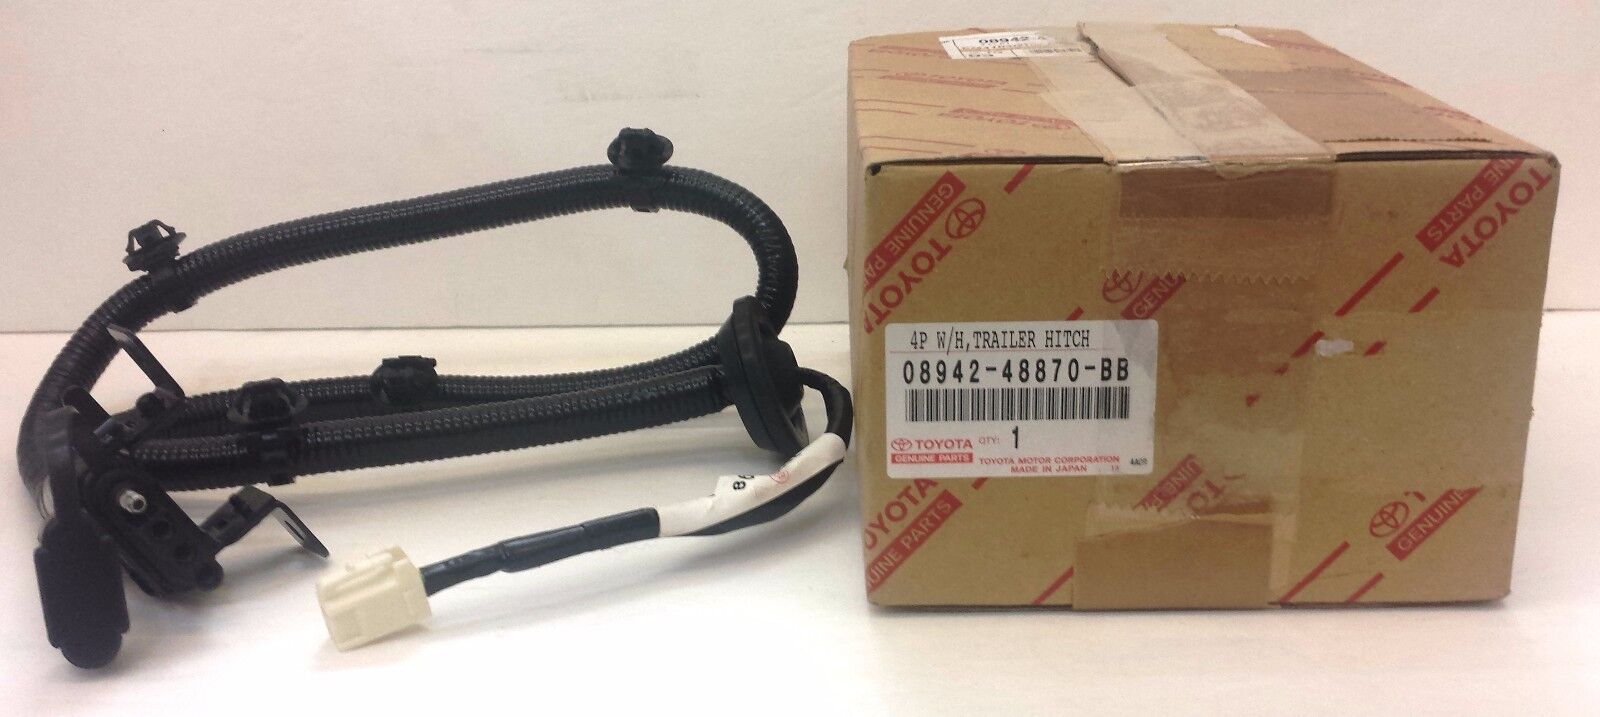 LEXUS OEM FACTORY TOW WIRE HARNESS 4 PIN FLAT 2004-2009 RX330 RX350 RX400H 